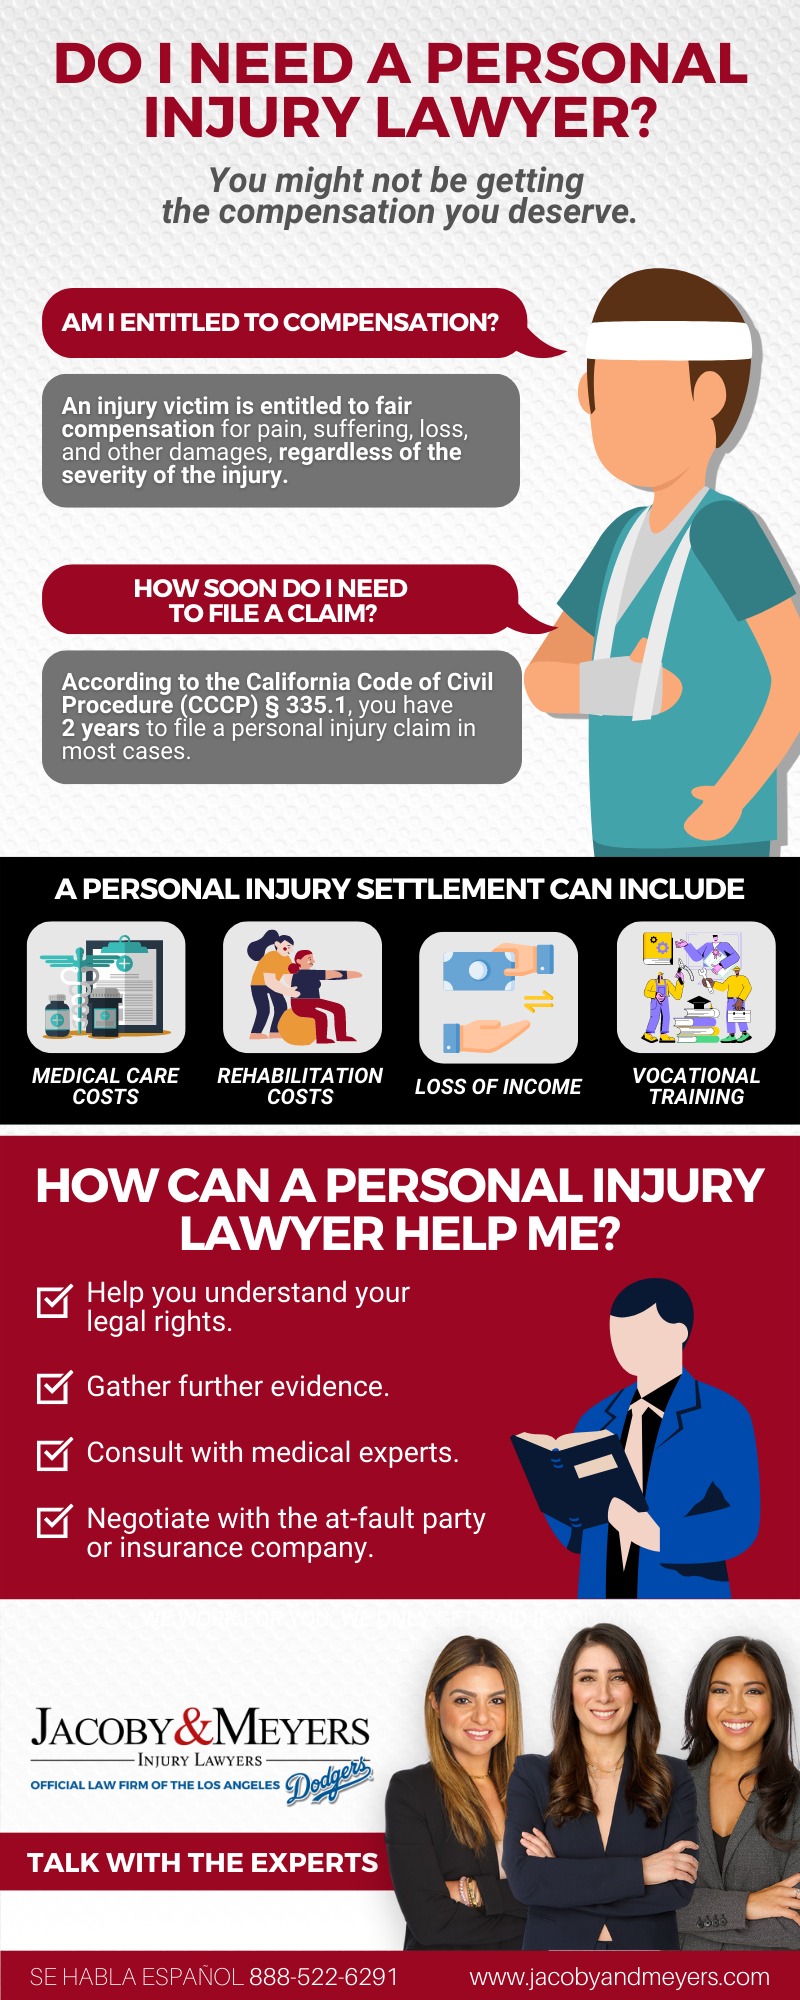 hire personal injury lawyer infographic